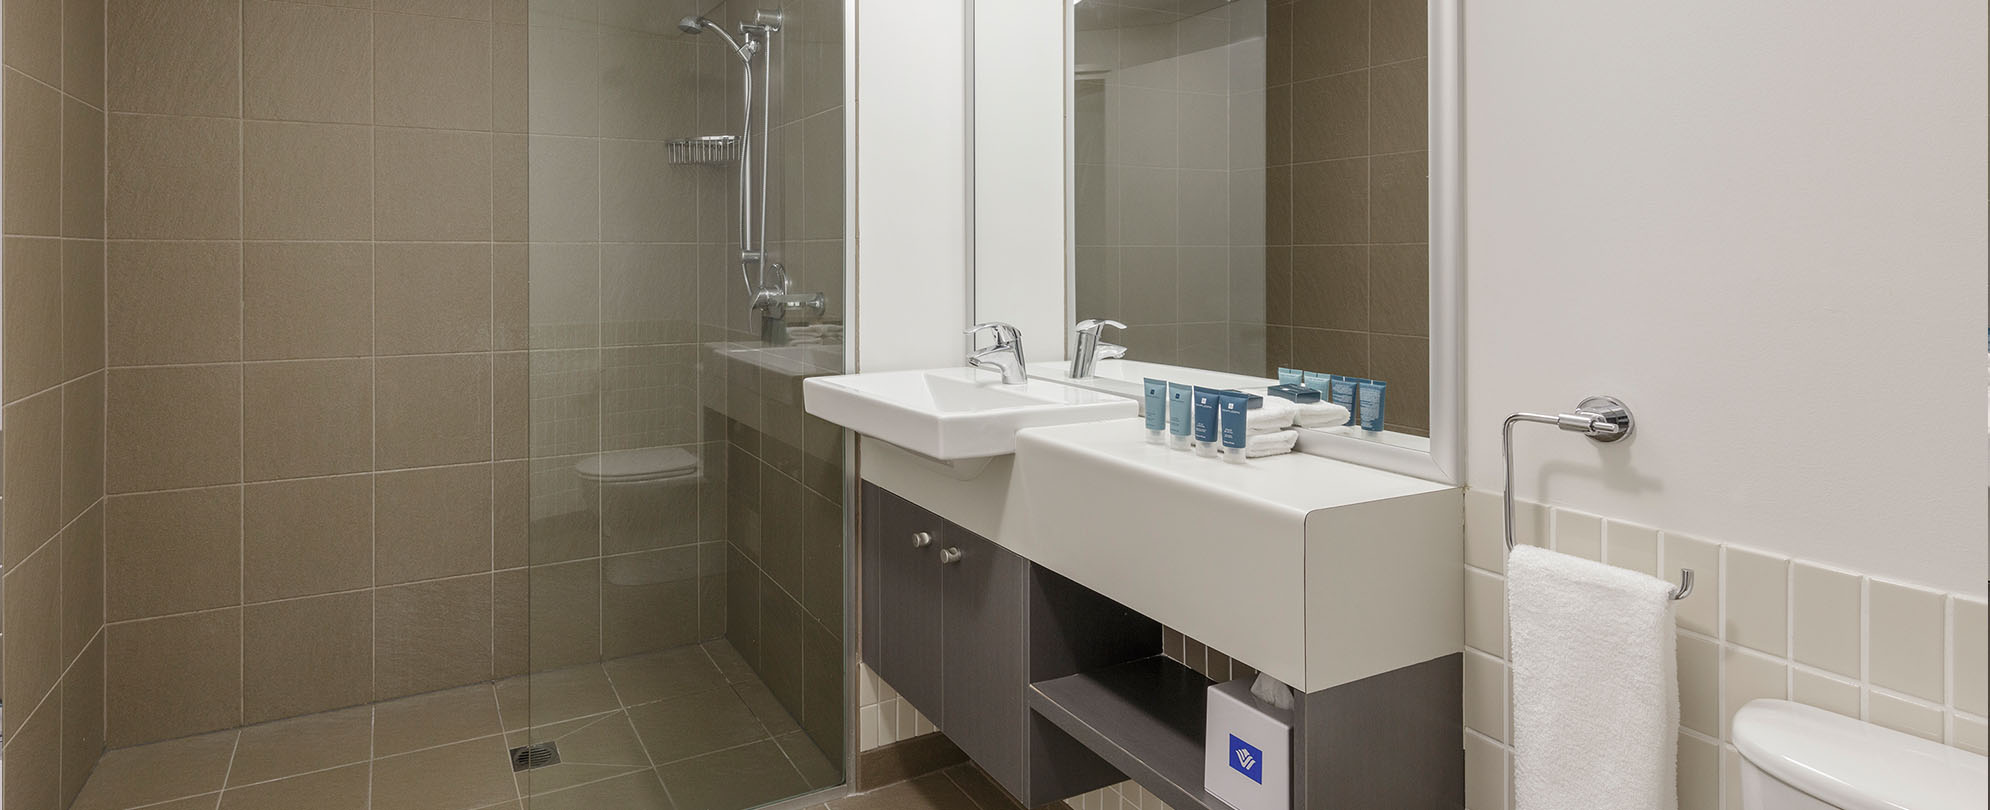 The bathroom with a walk-in shower in a 2-bedroom suite at Club Wyndham Coffs Harbor.